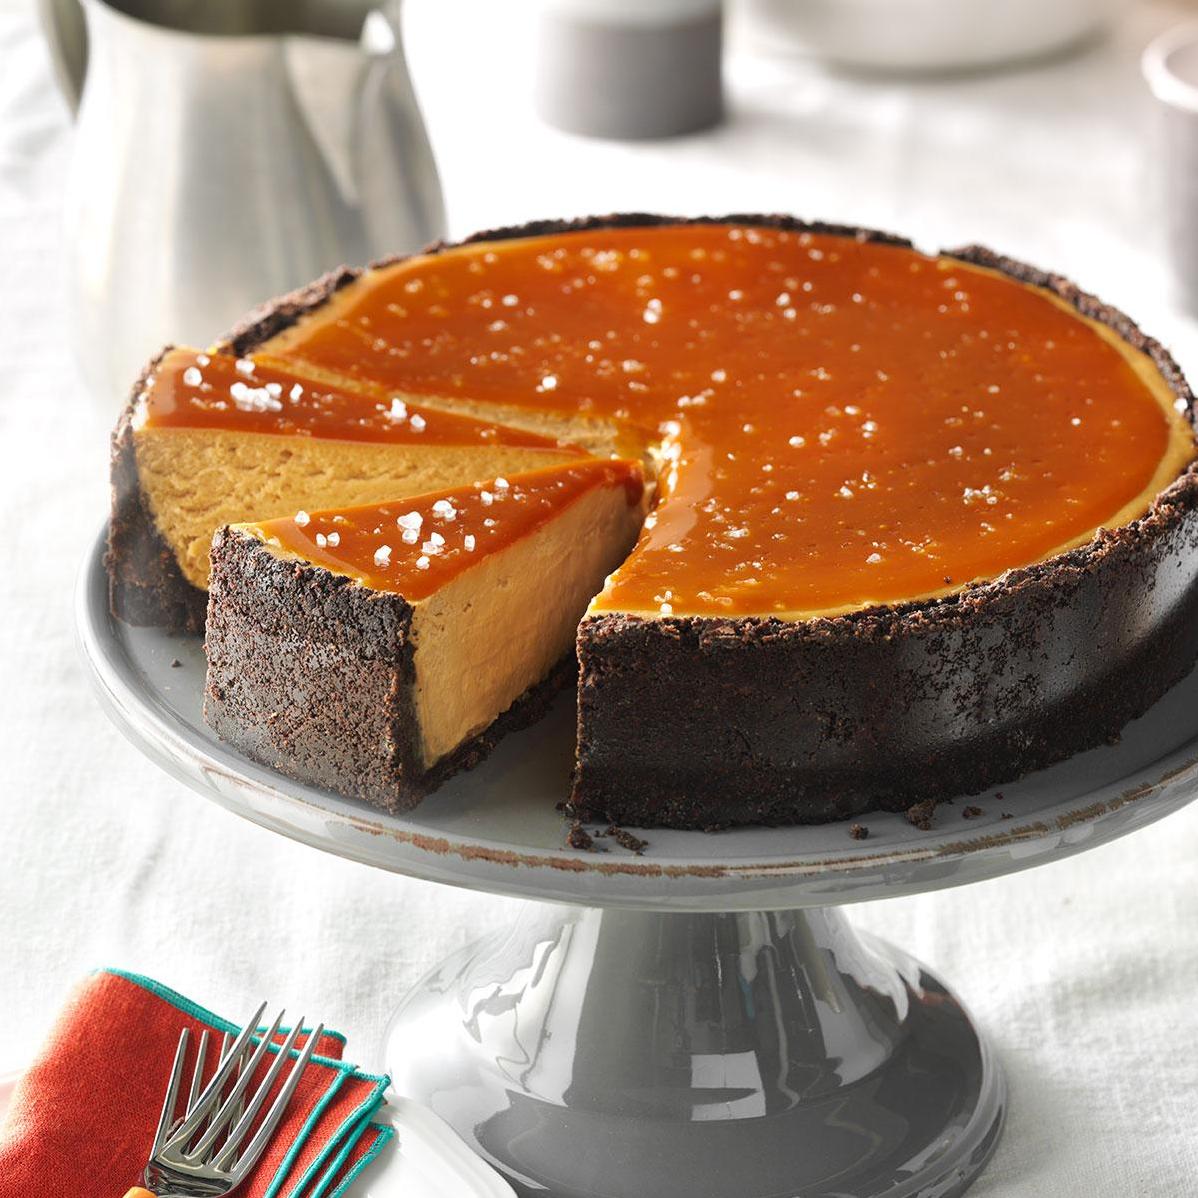  This Caramel Cappuccino Cheesecake is the perfect treat for coffee and cheesecake lovers!